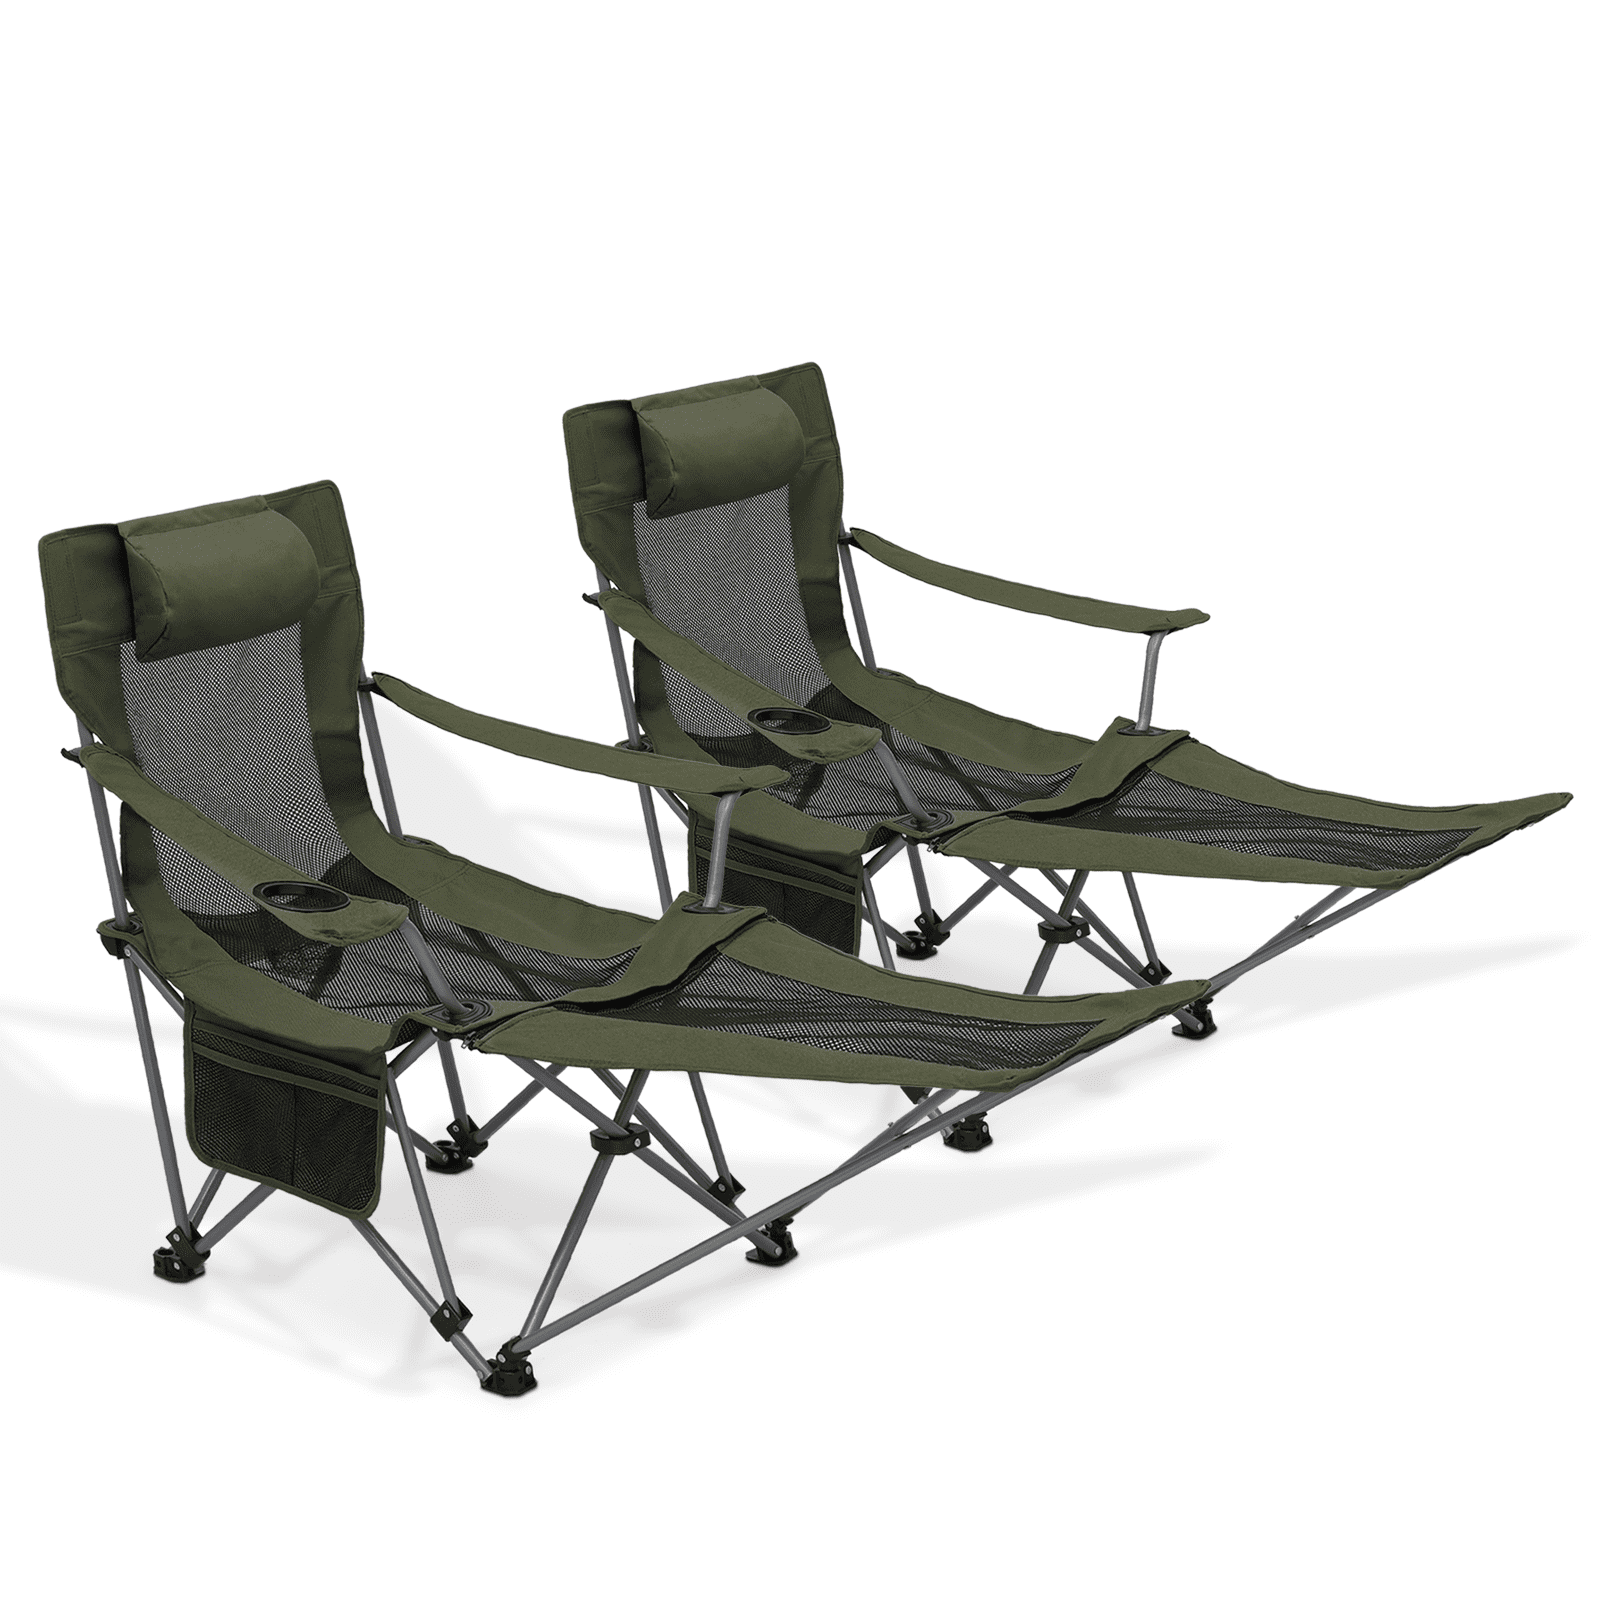 MoNiBloom Set of 2 Folding Camping Chair Beach Chair, Portable Lounge Travel Outdoor Seat with Cup Holder & Carry Bag, Dark Green